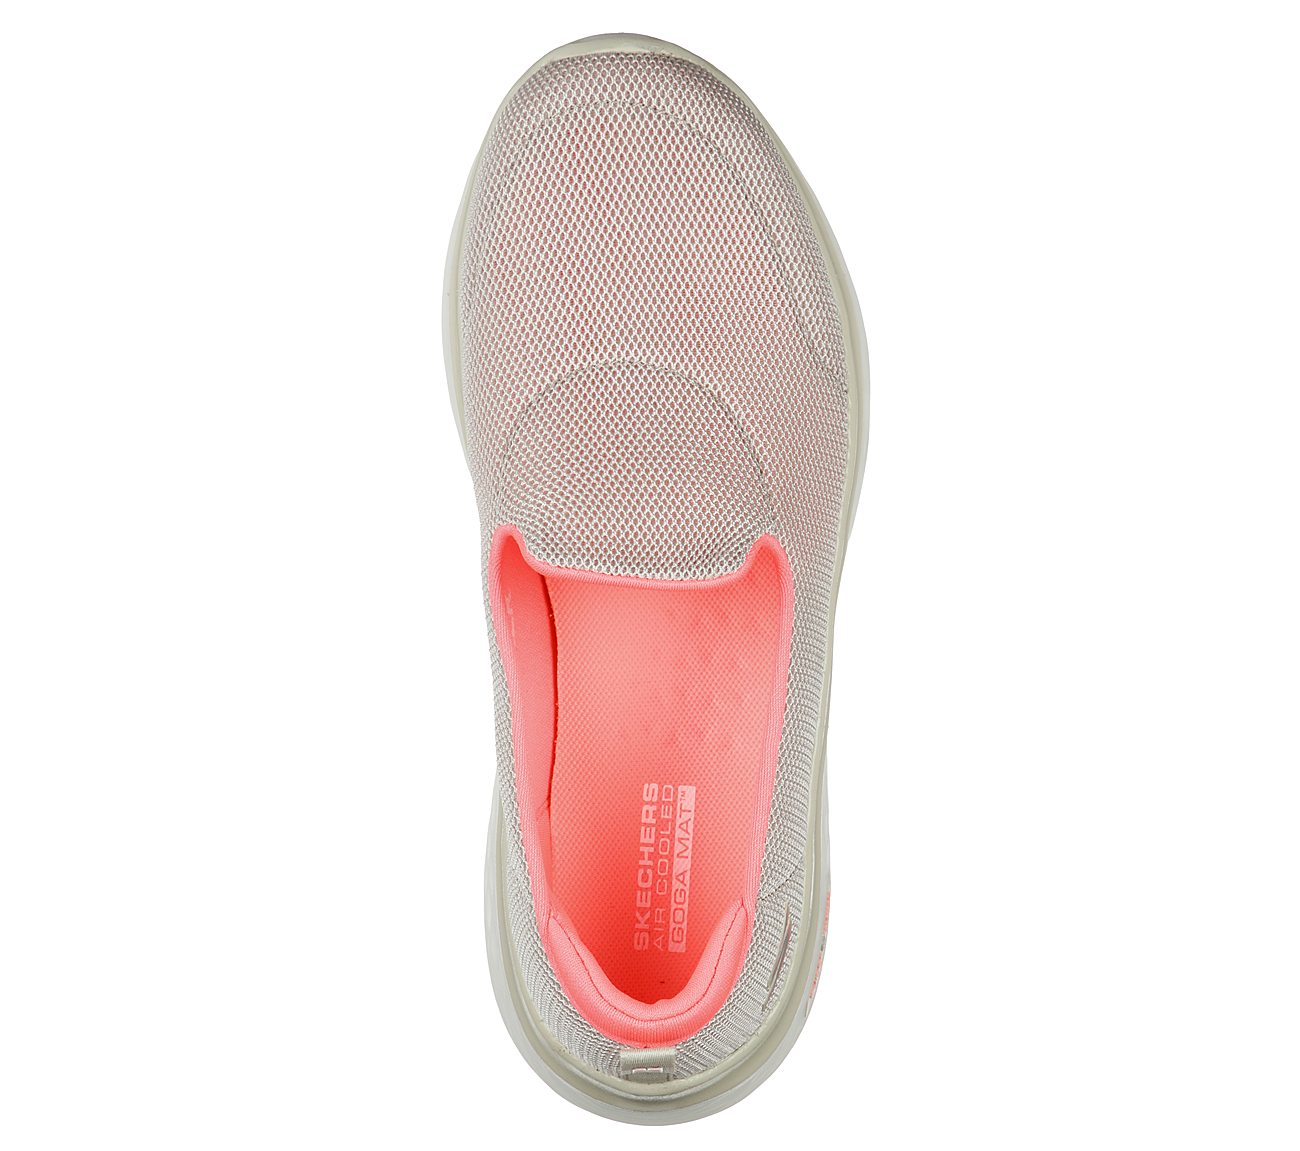 GO WALK HYPER BURST-EXTREME O, TAUPE/CORAL Footwear Top View